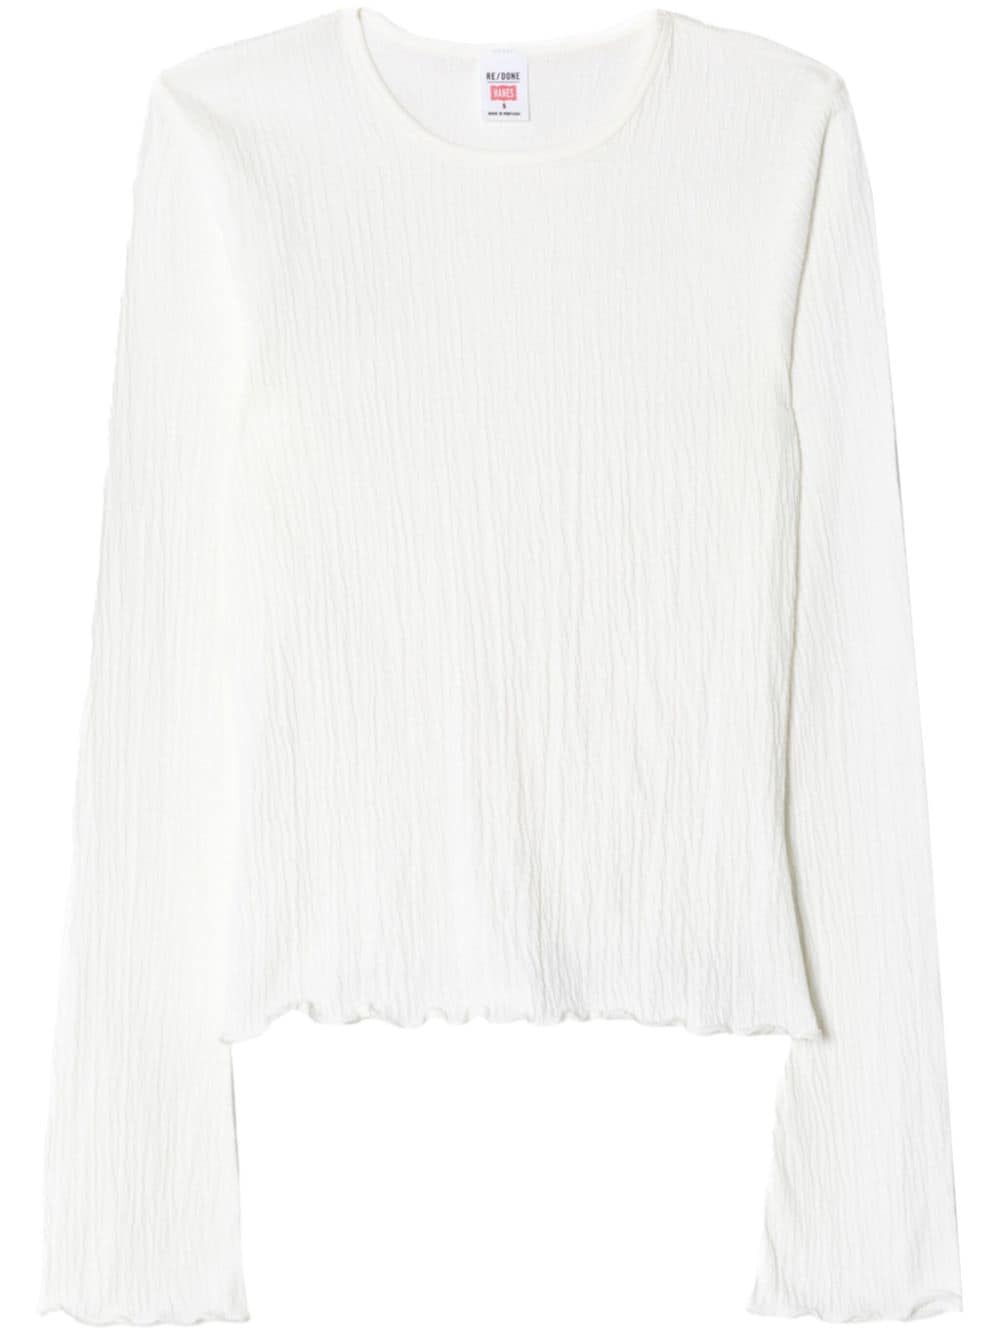 RE/DONE bell-sleeved crinkled top - White von RE/DONE